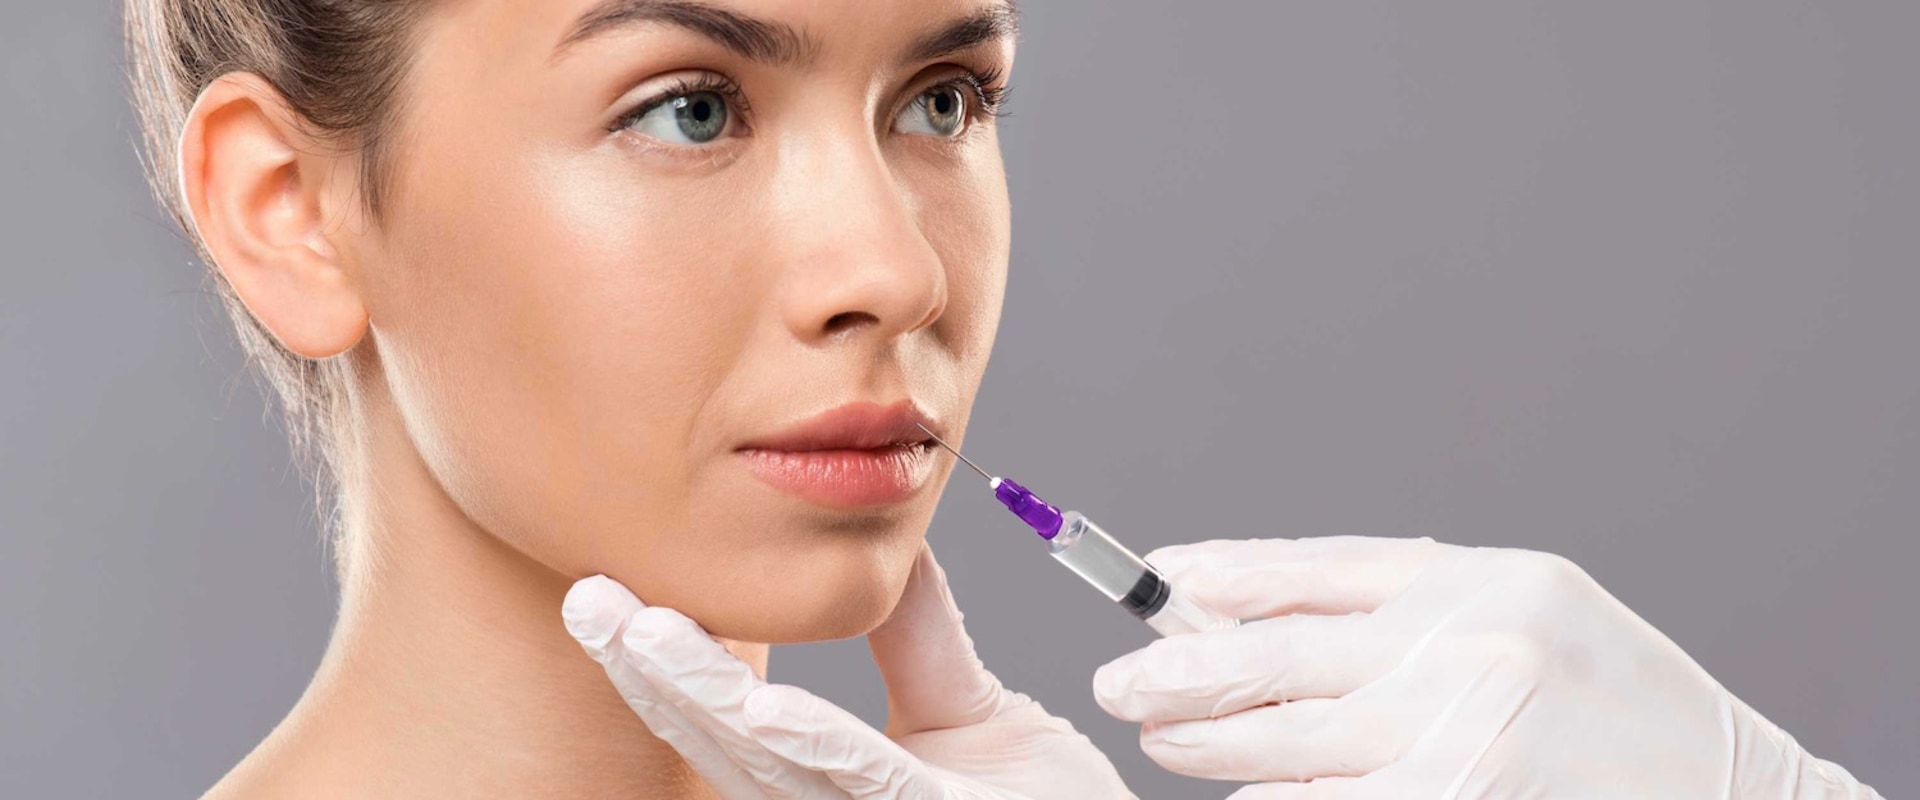 How do you get rid of juvederm lumps?